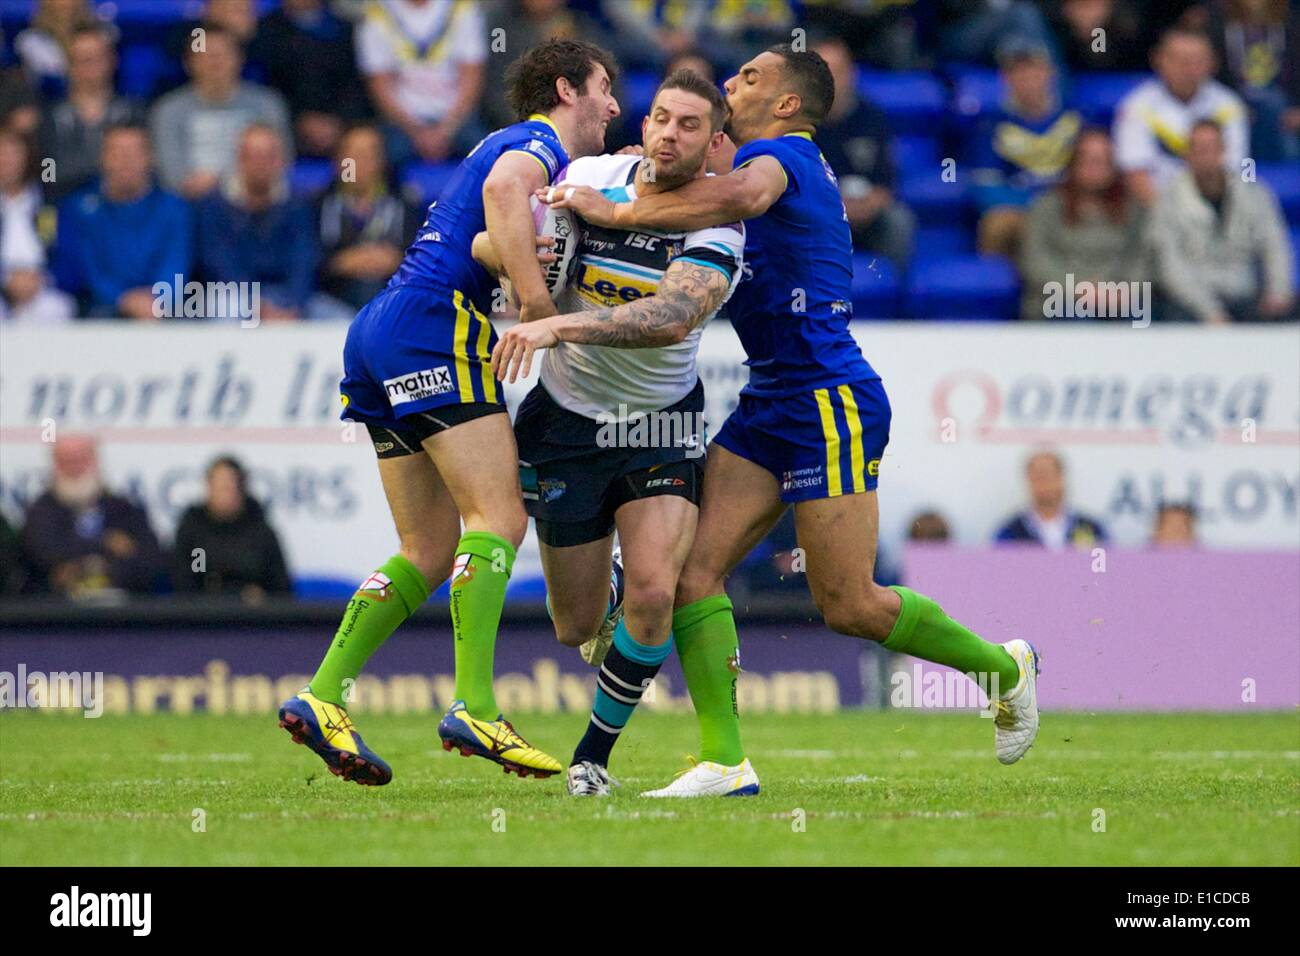 Warrington, UK. 30th May 2014. Warrinton Wolves stand-off Stefan Ratchford in action during the Super League rugby match between Warrington Wolves and Leeds Rhinos from the Halliwell Jones stadium. Credit:  Action Plus Sports Images/Alamy Live News Stock Photo